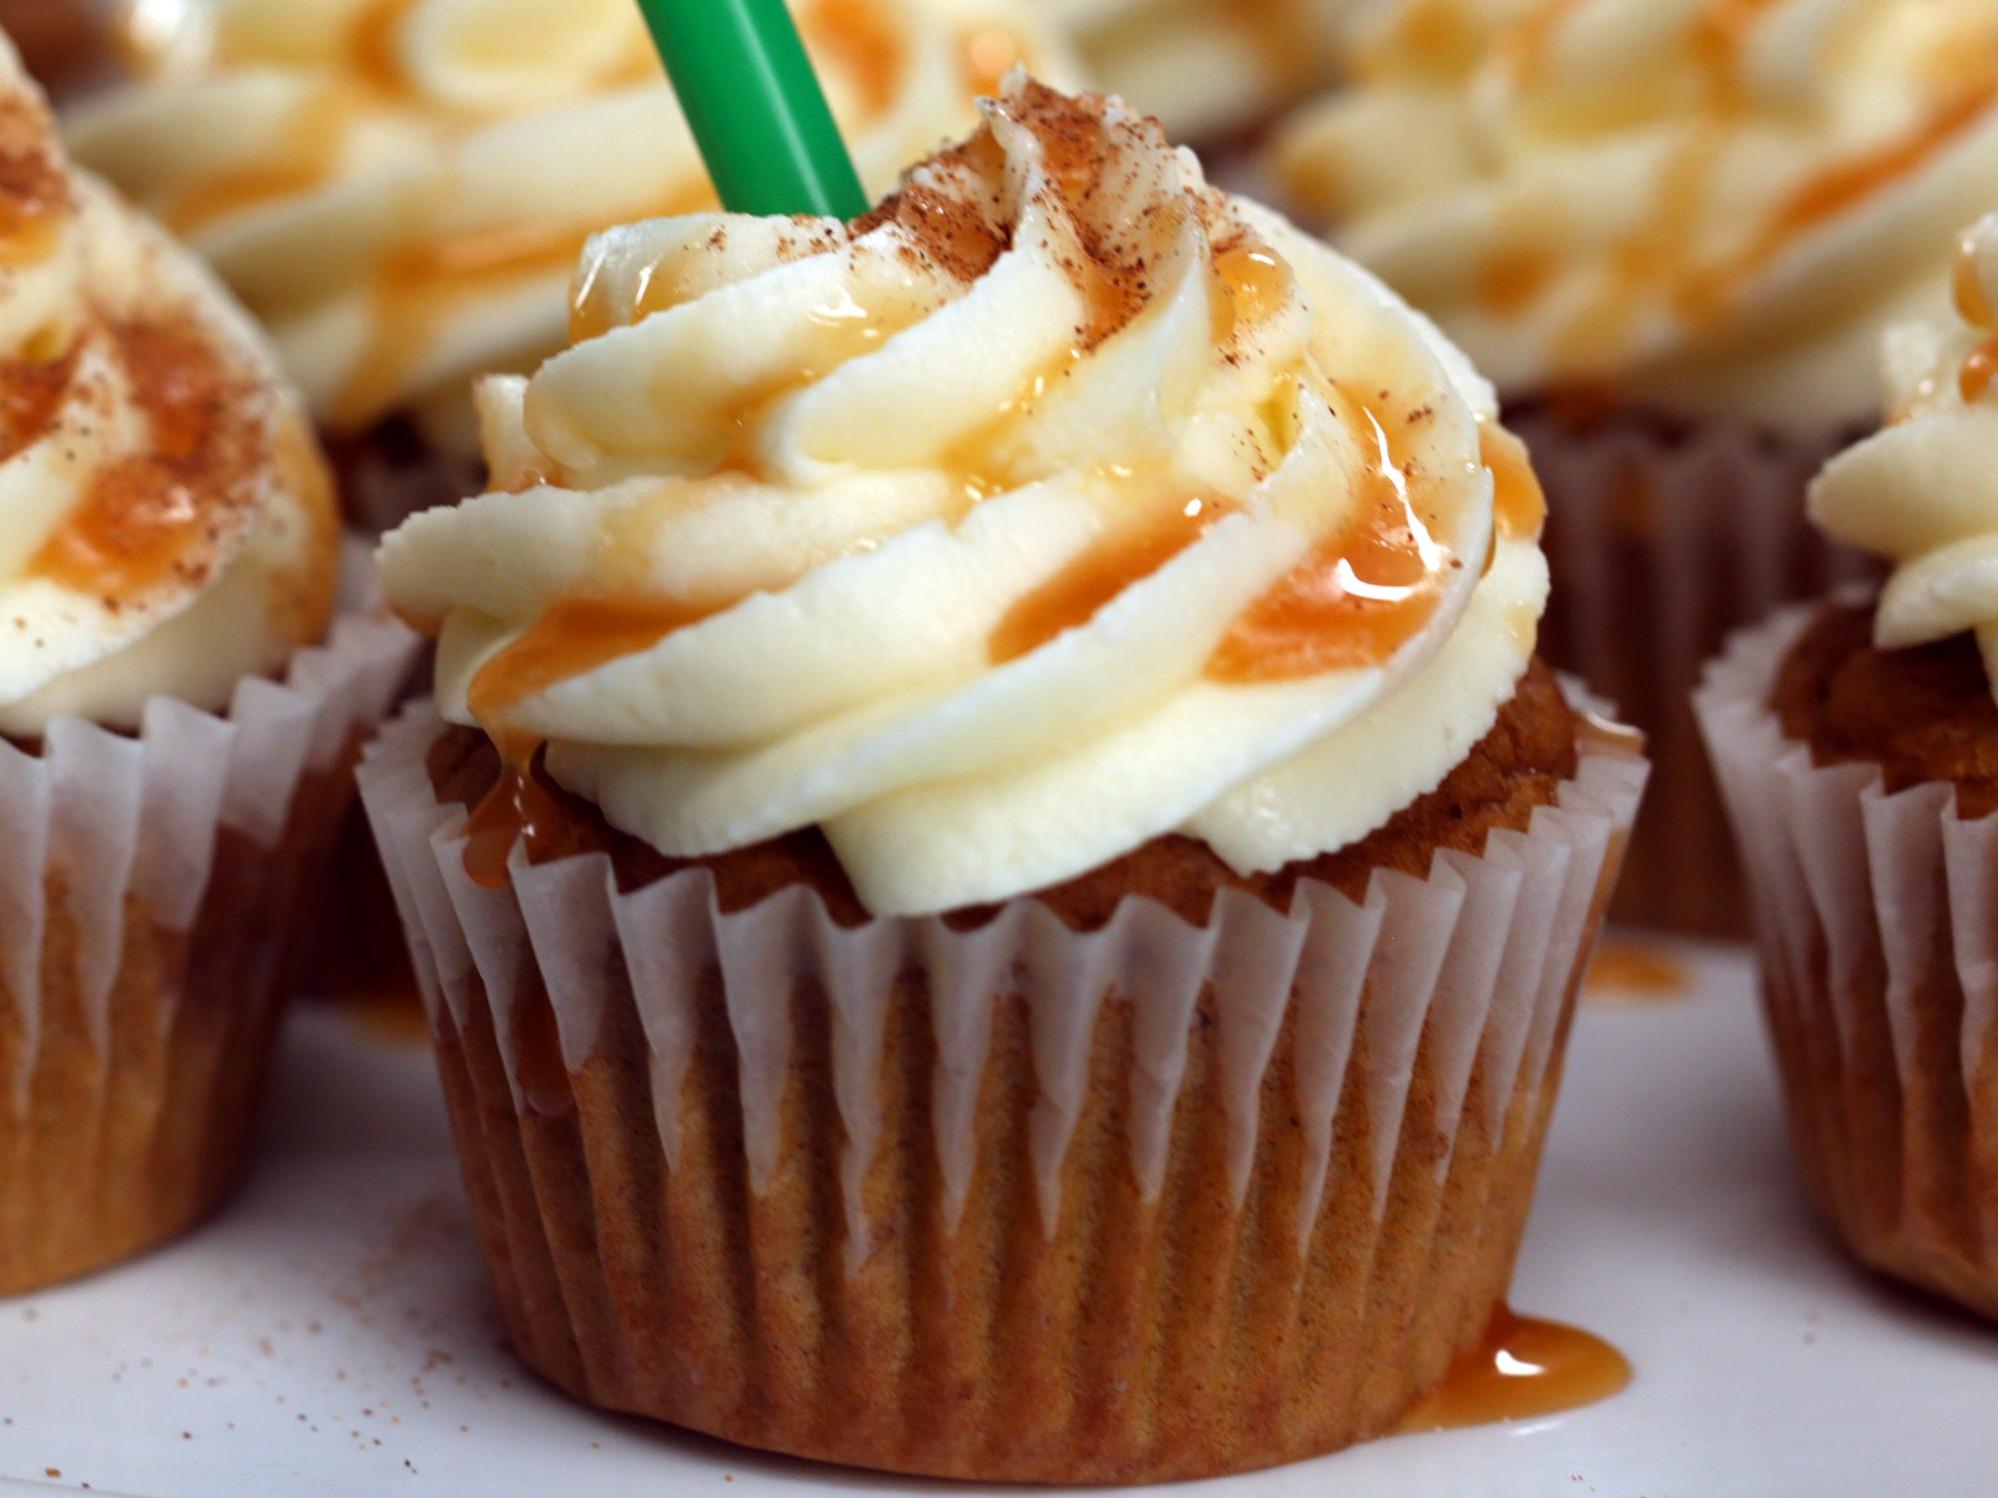  These cupcakes are so good, you'll wish you could smell them through the screen.